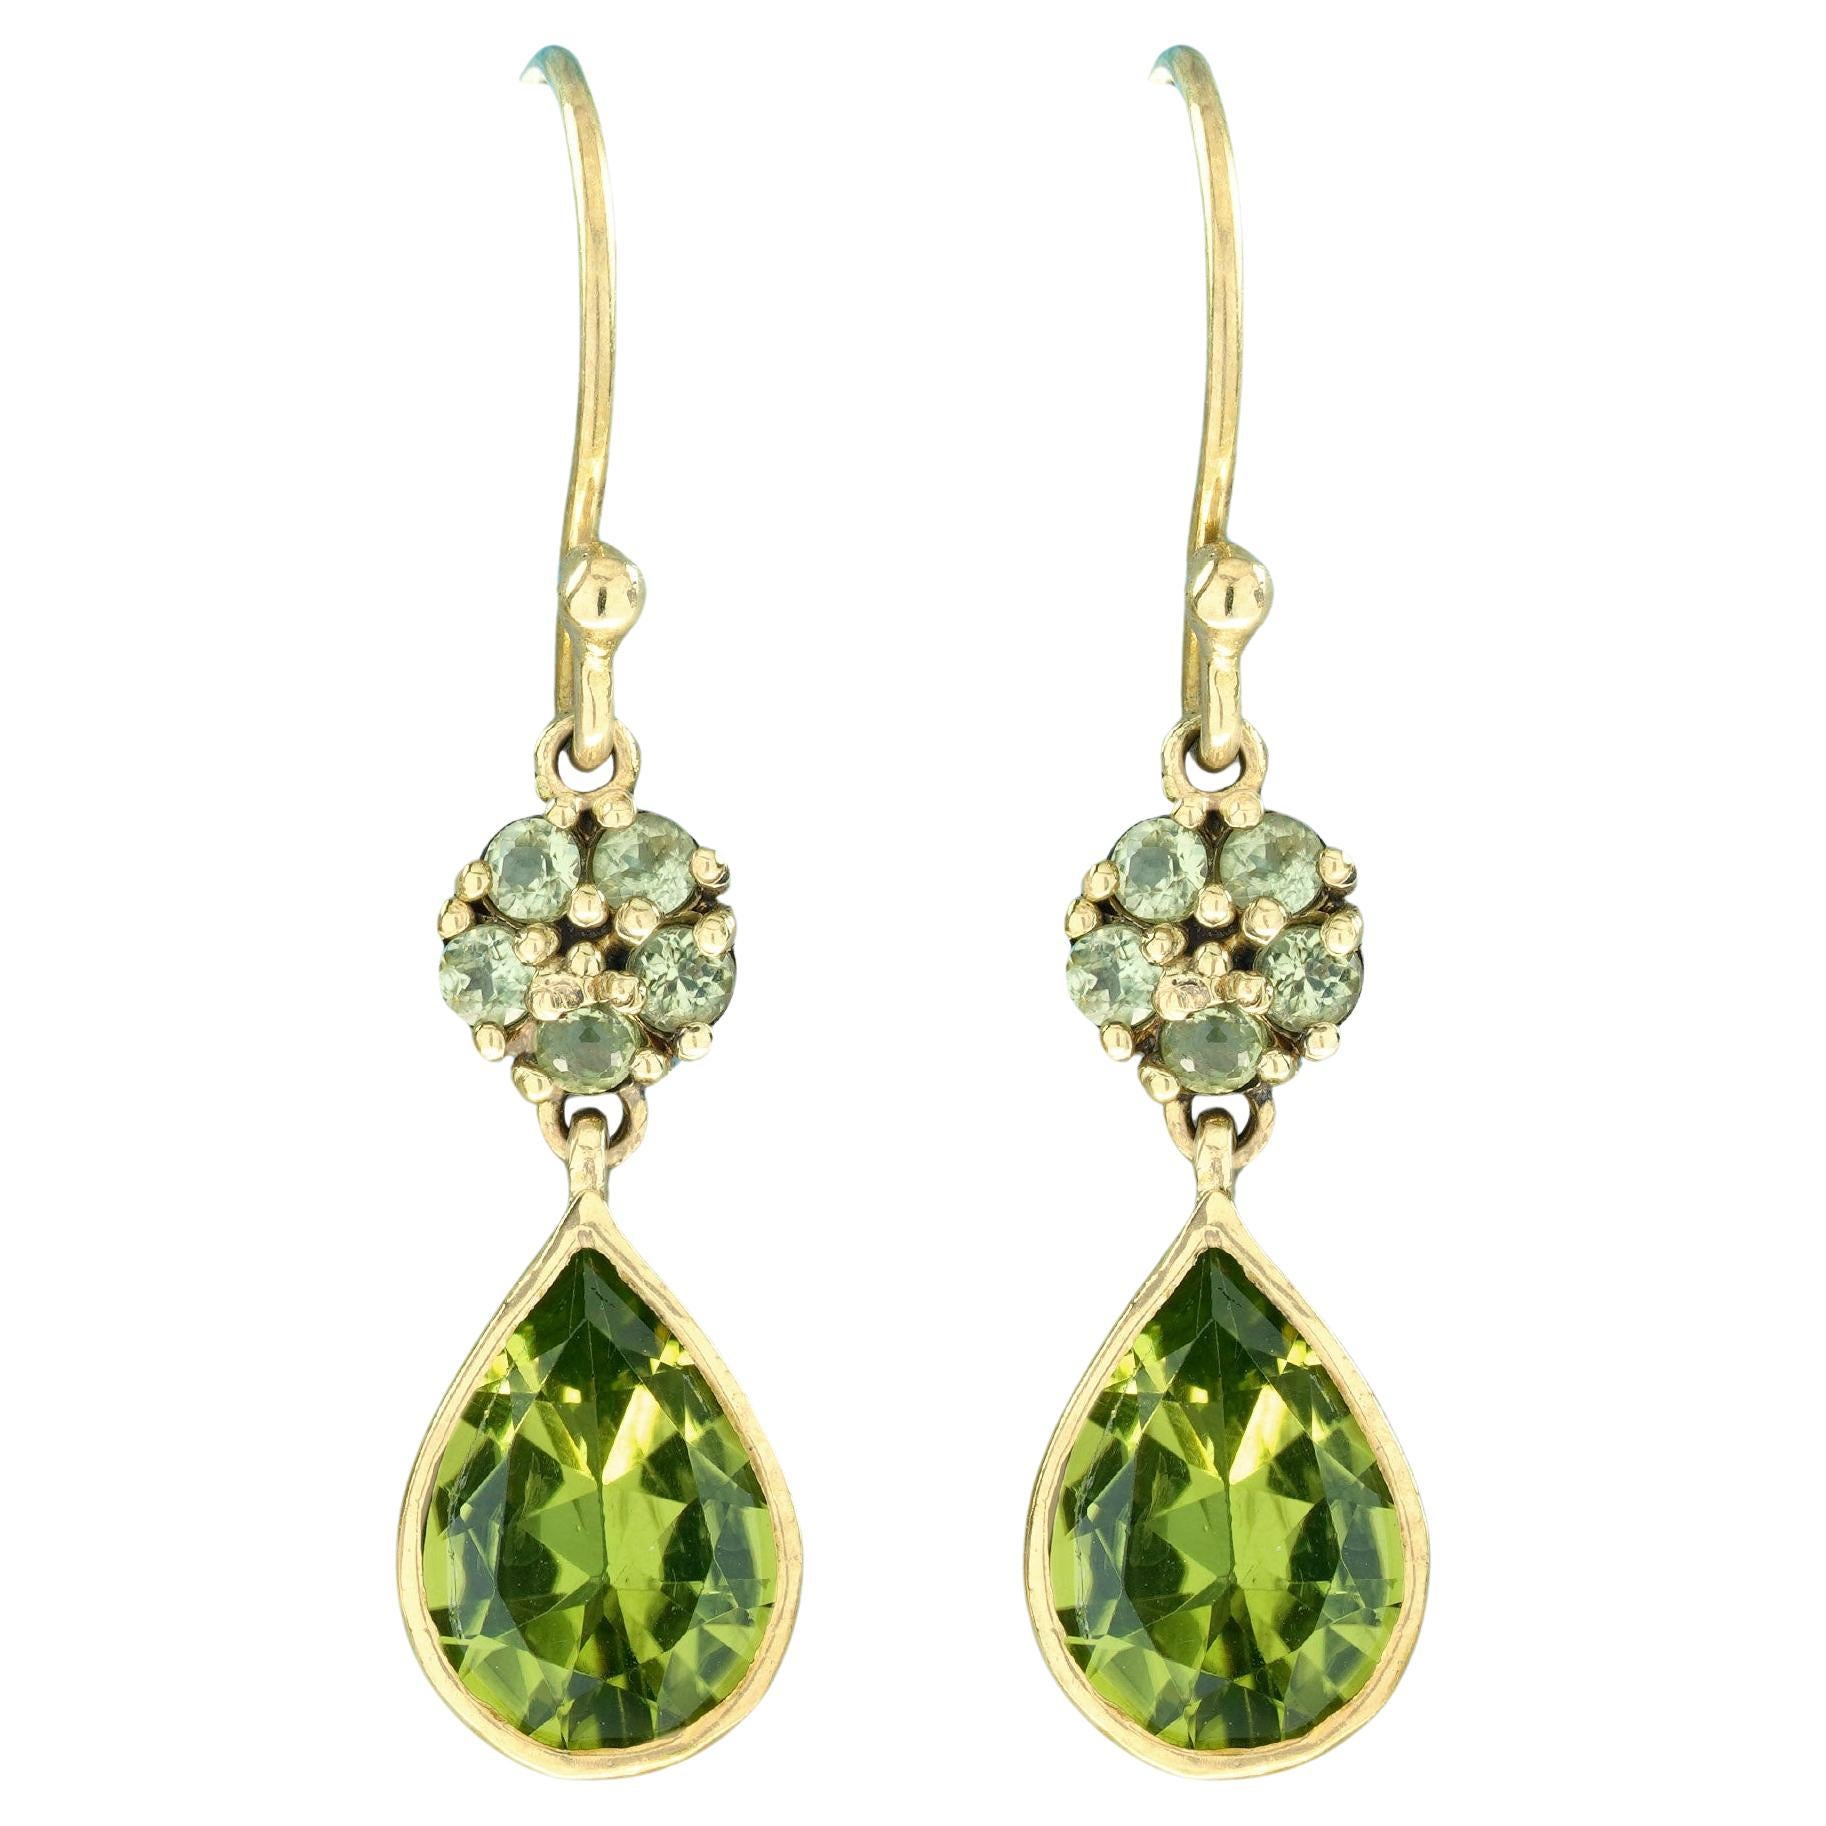 4 Ct. Natural Peridot Vintage Style Floral Drop Earrings in 9K Yellow Gold